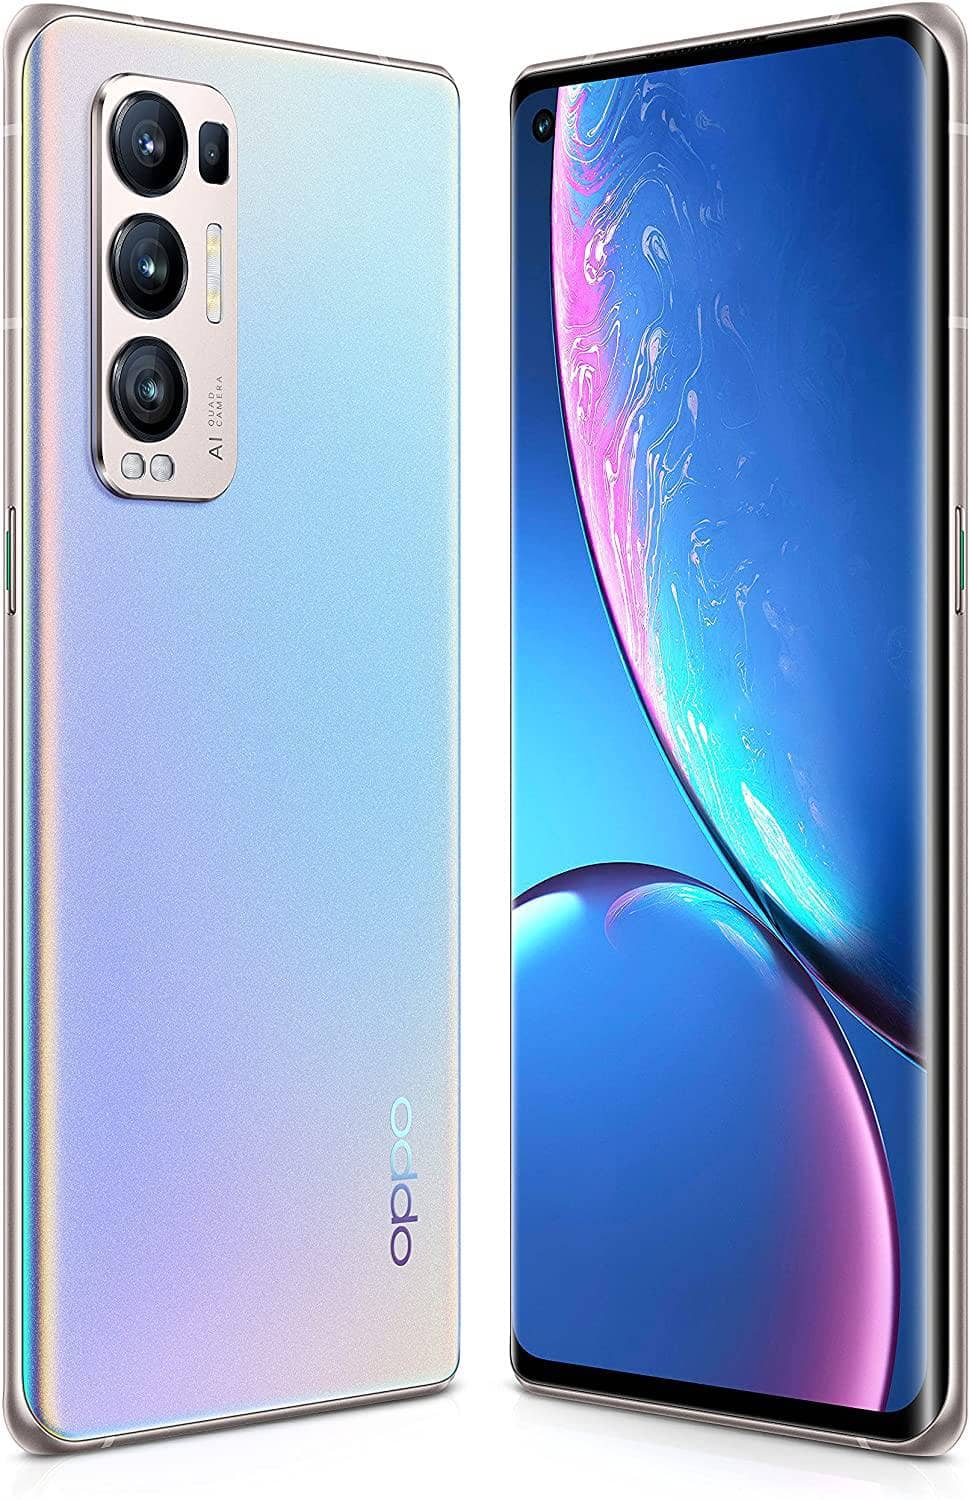 OPPO Reno5 Pro 5G Dual SIM Smartphone with OPPO Speaker 256GB 12GB RAM 65W SuperVOOC 50MP AI Quad Camera 4K AI Highlight Video Fingerprint and Face Recognition 5G Mobile Phone Galactic Silver - DealYaSteal